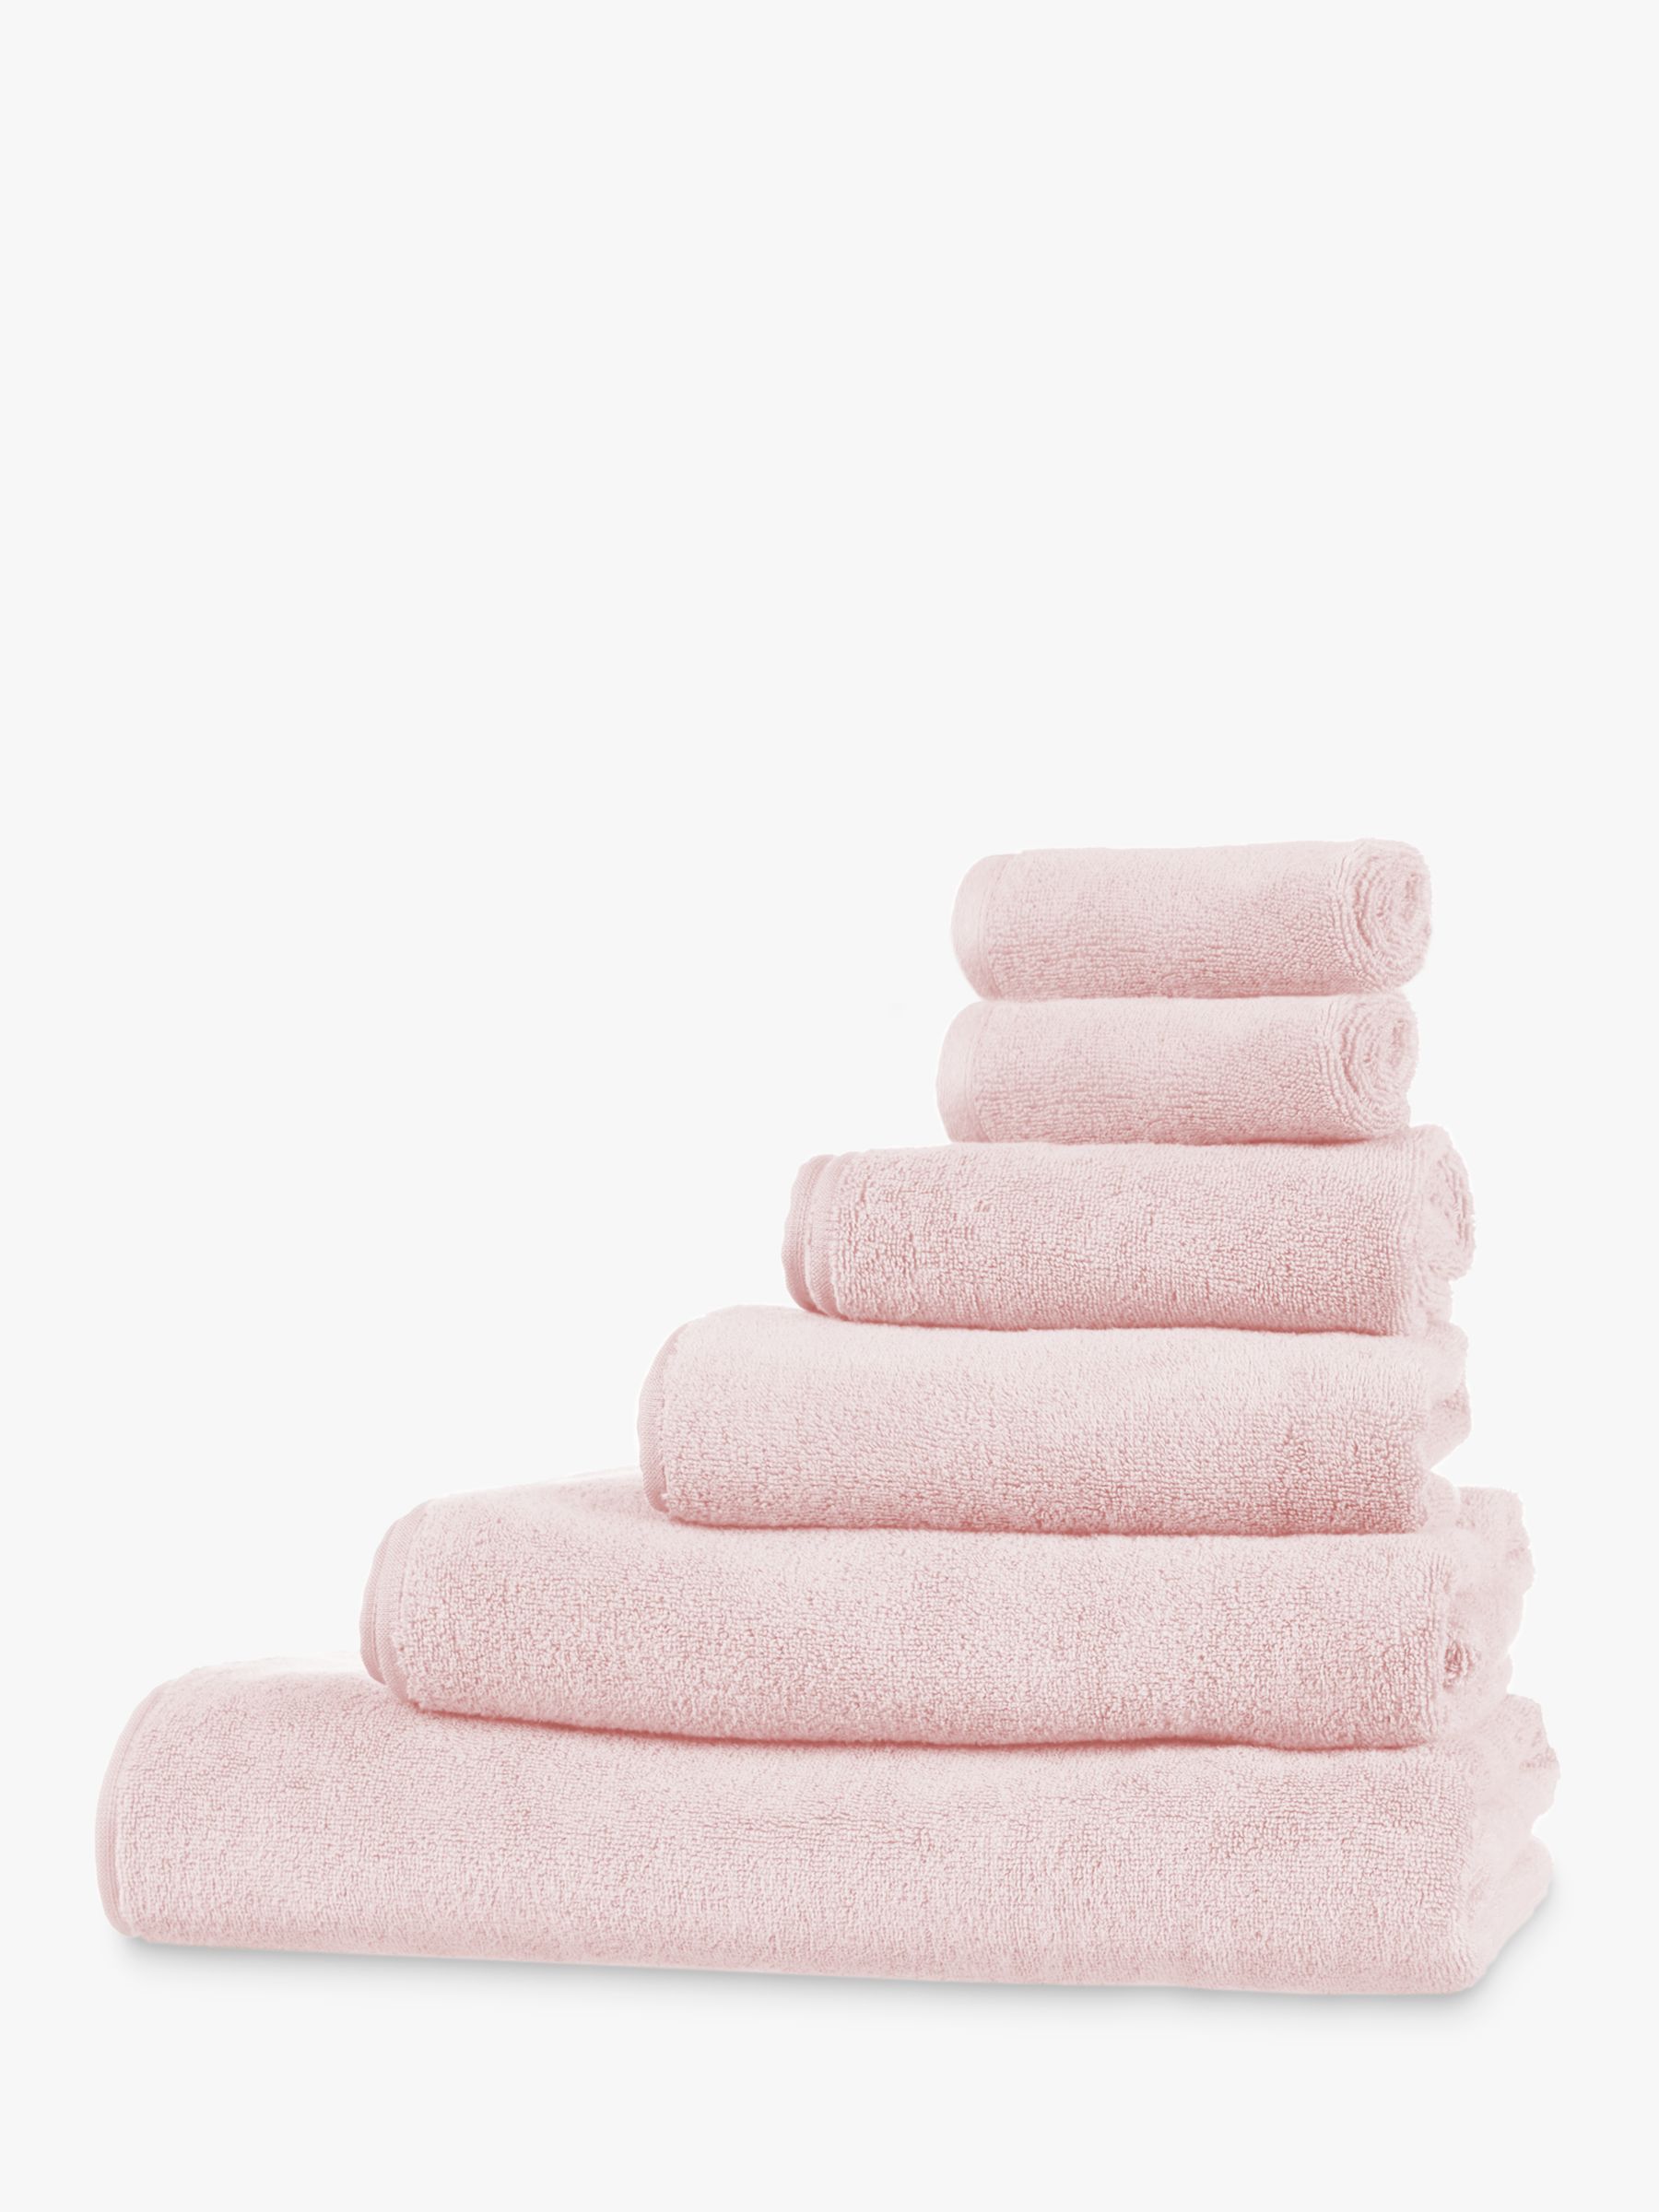 House by John Lewis Quick Dry Bath Towel, Nude Pink